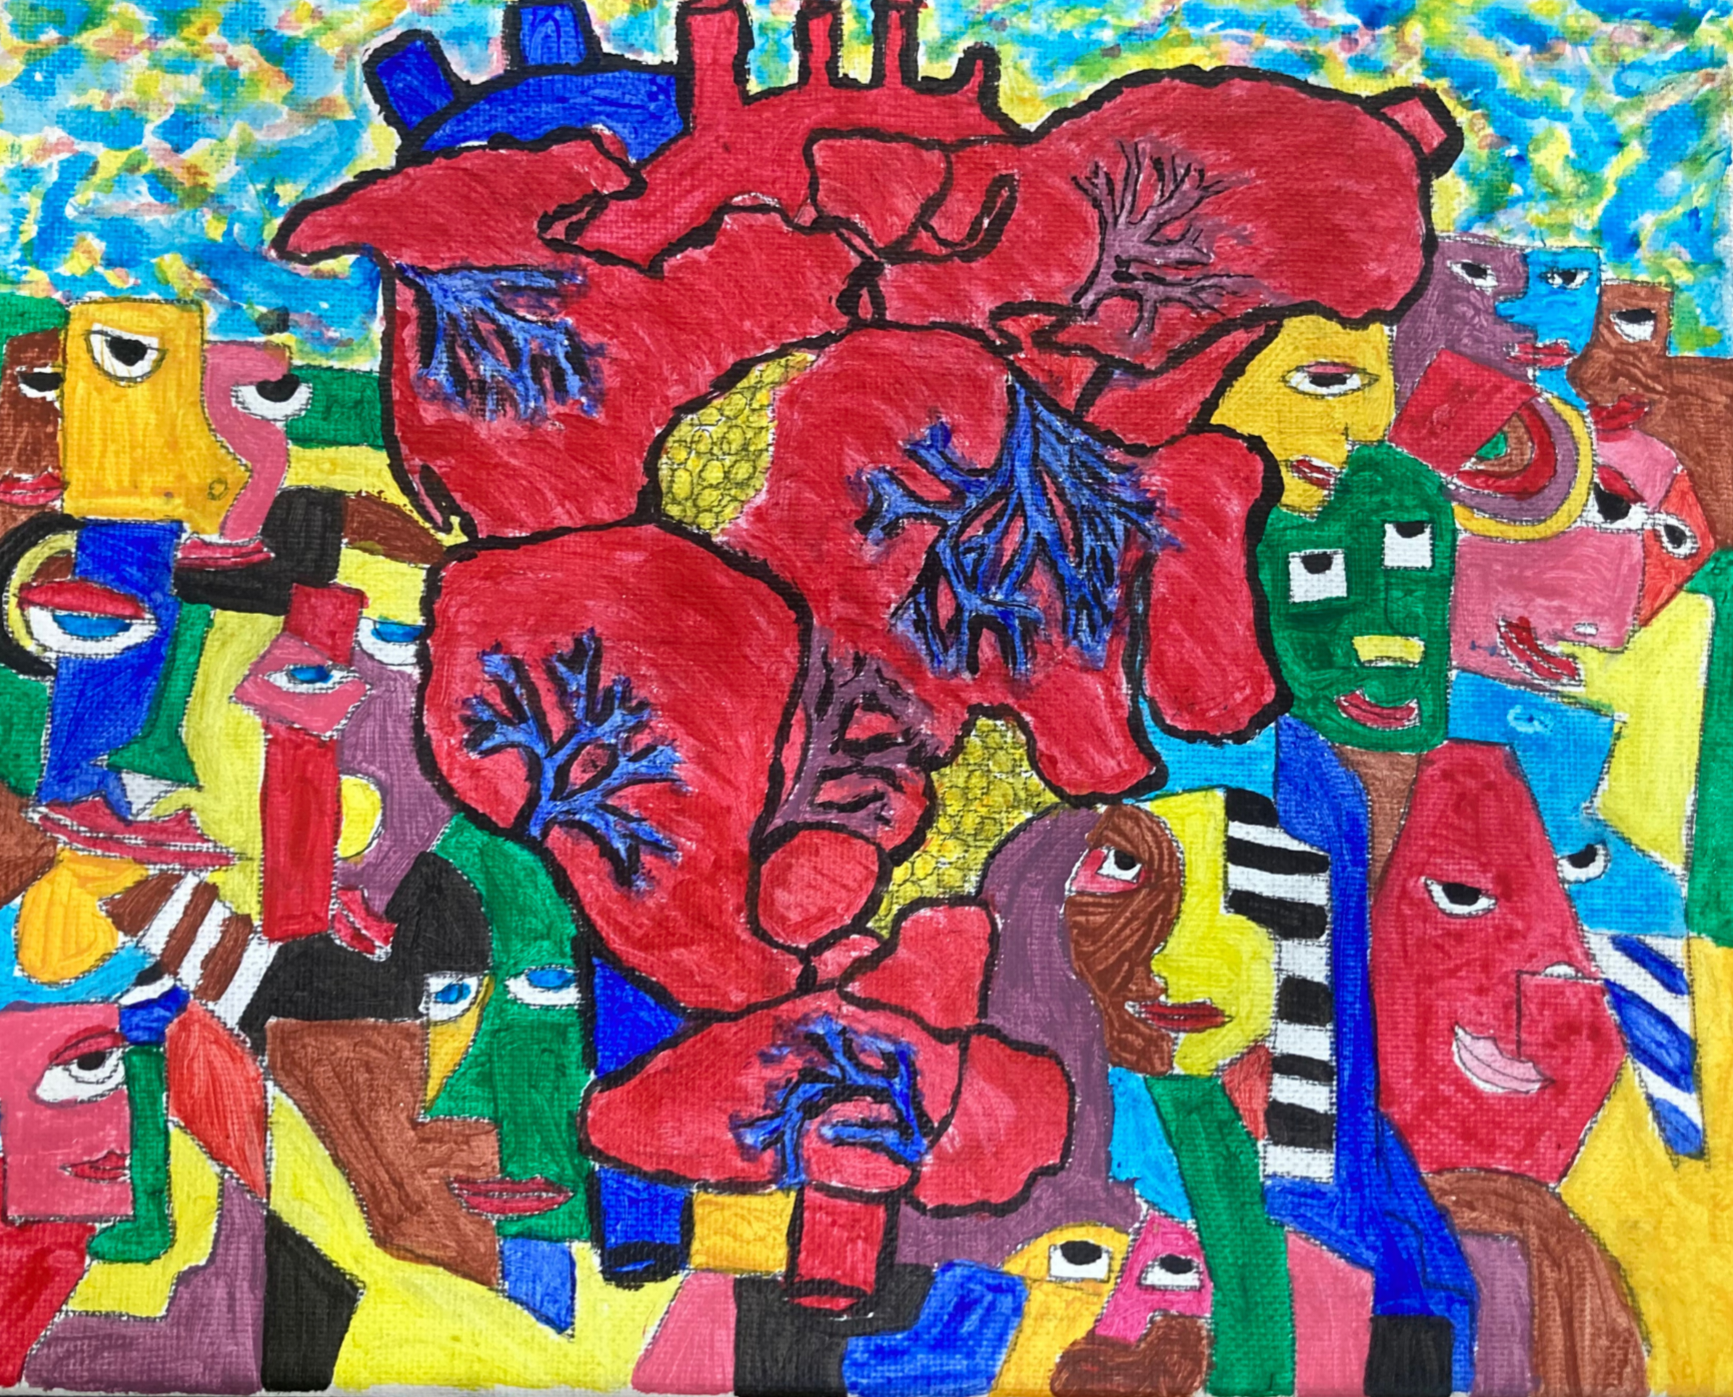 Red and Blue Colorful Painting of Heart-Shaped Pangea with Faces Surrounding Continent